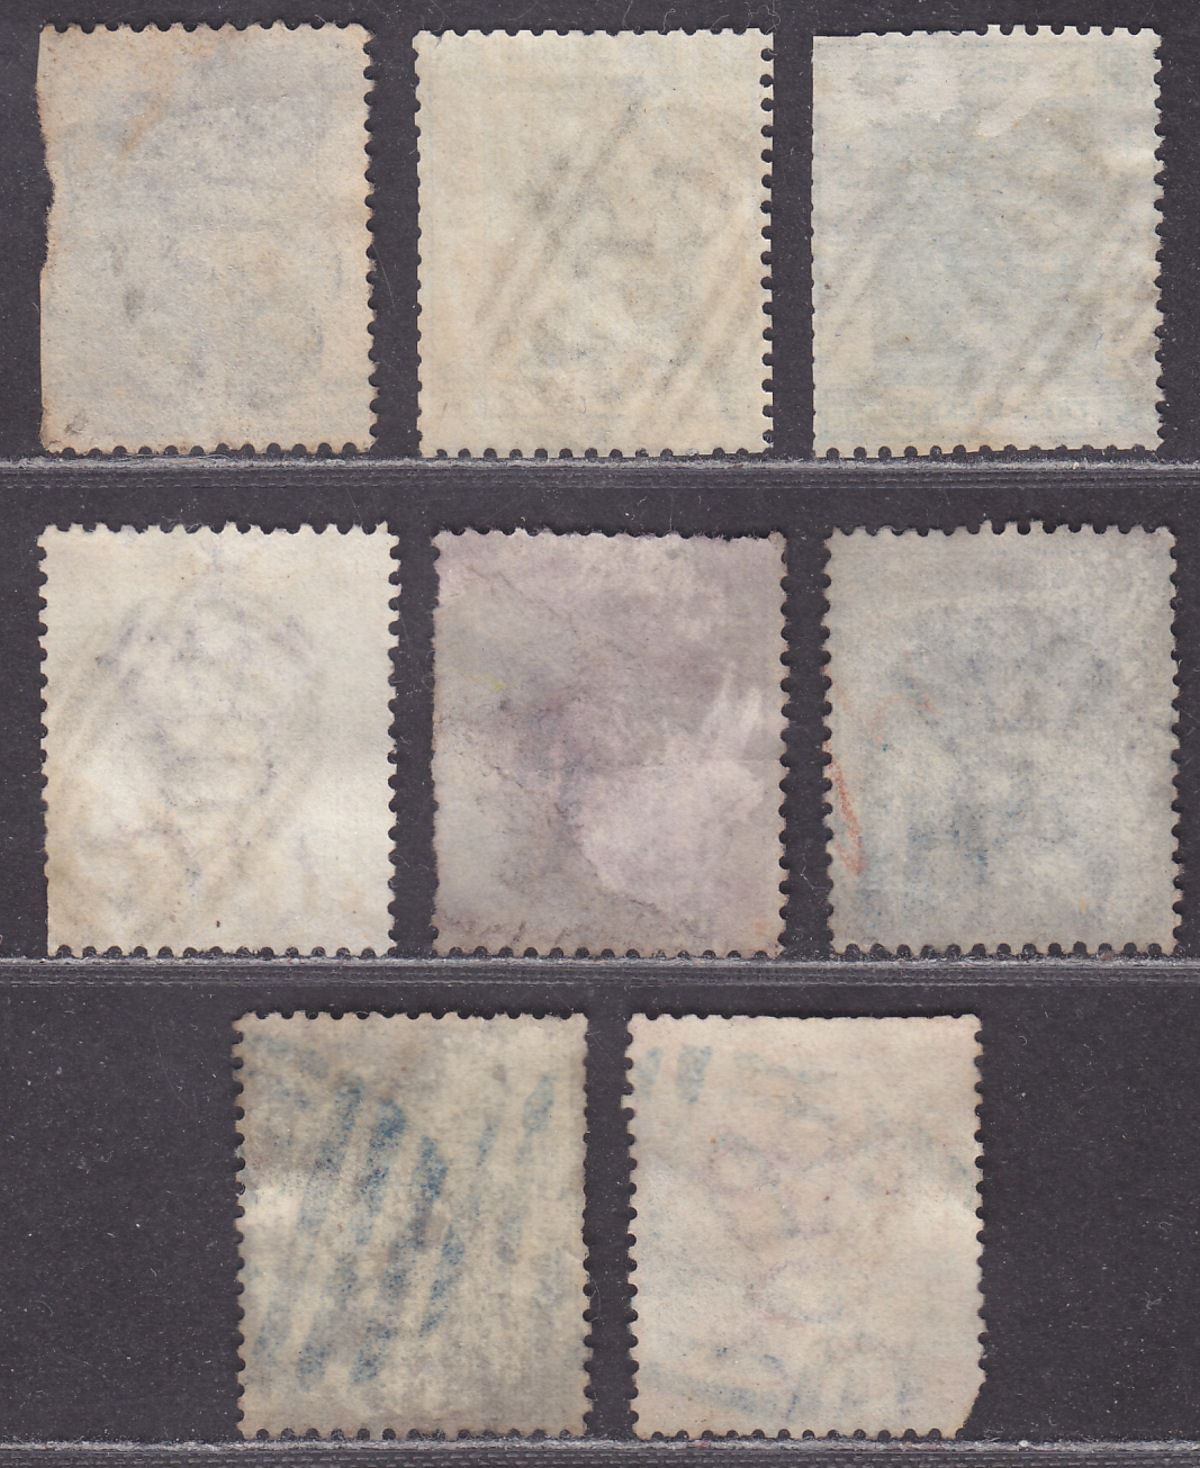 Hong Kong 1862-71 Queen Victoria Selection to 96c Used with faults